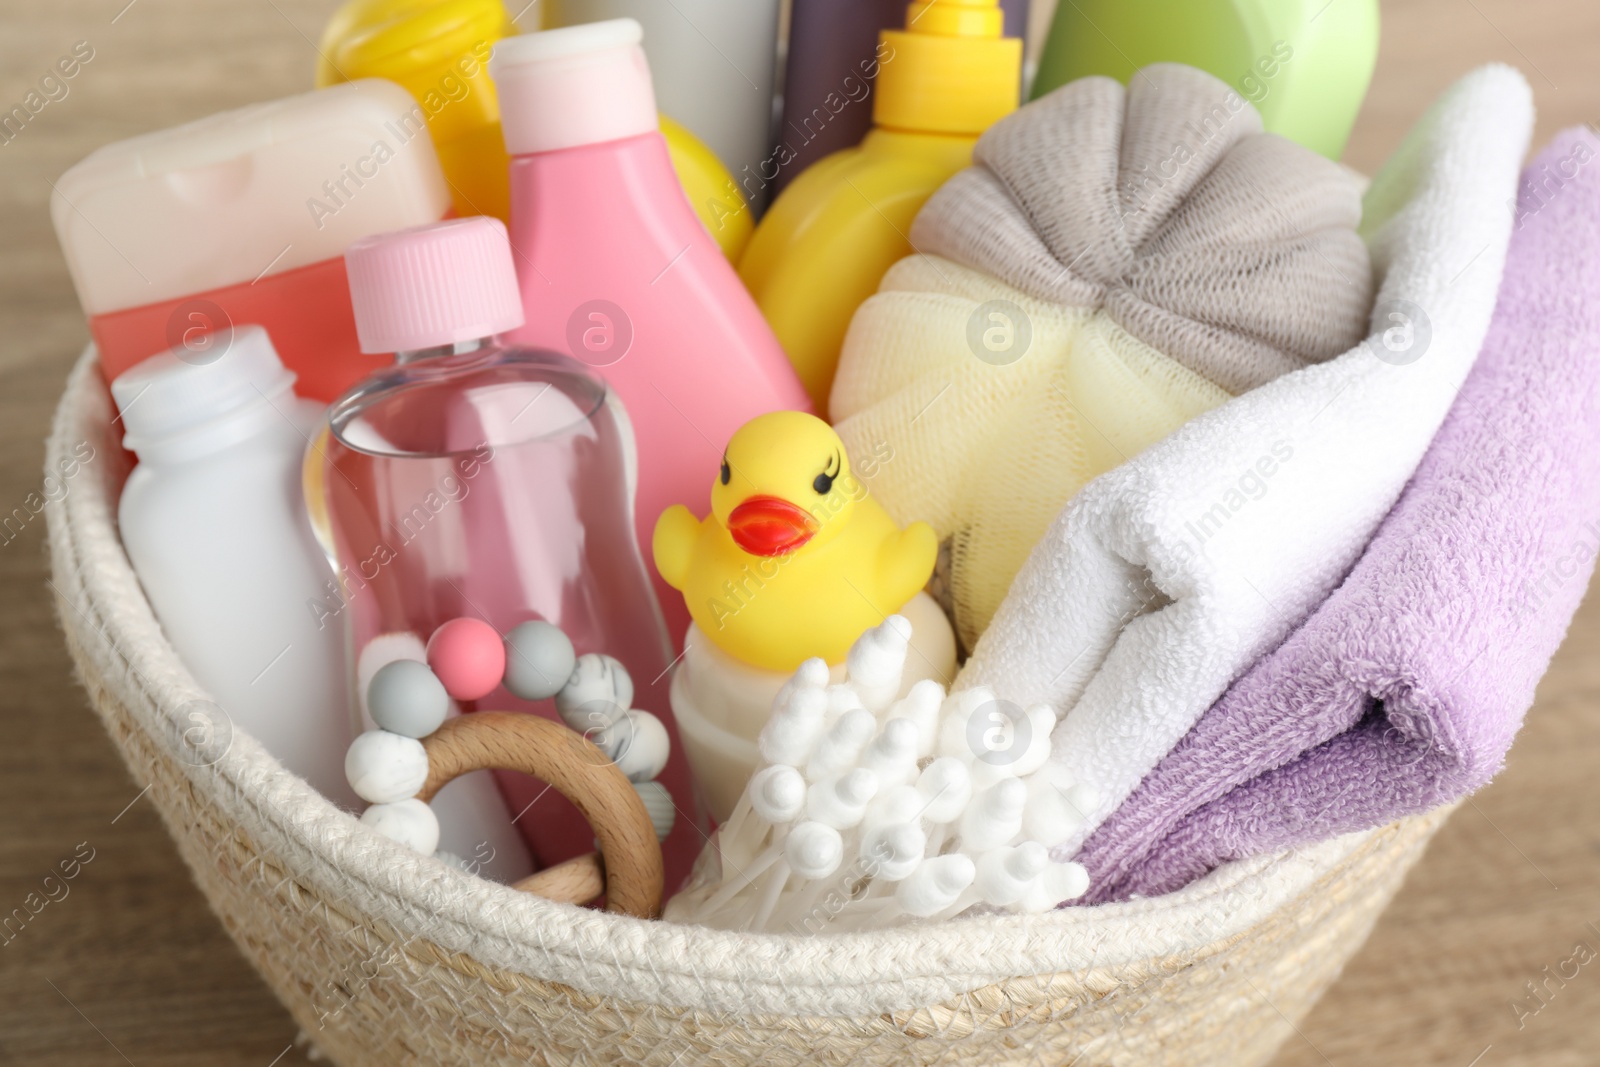 Photo of Wicker basket full of different baby cosmetic products, bathing accessories and toys on wooden table, closeup